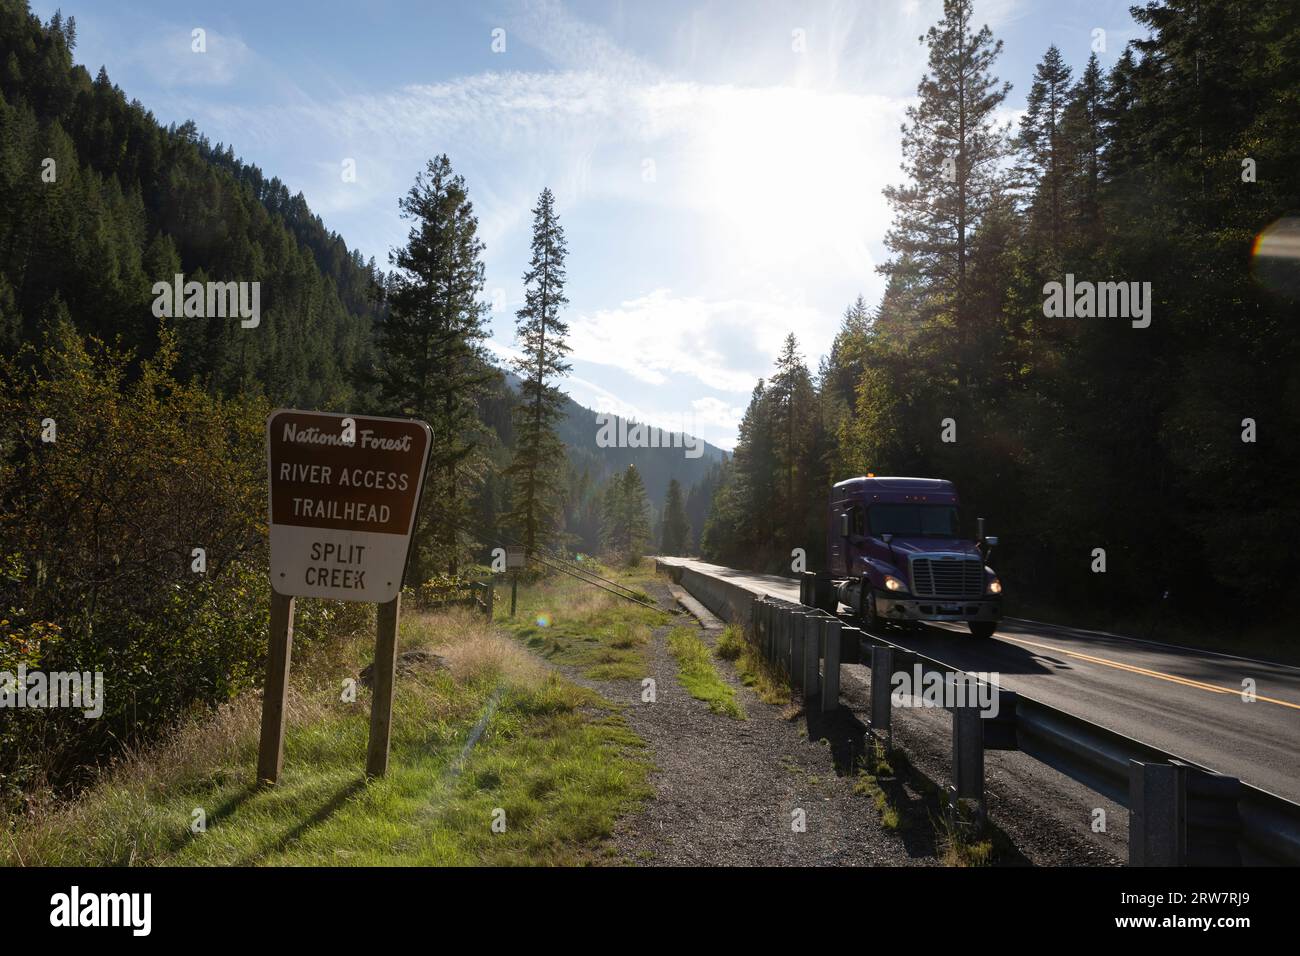 A truck on US Highway 12 passes the Split Creek Trailhead trailhead along the Lochsa River in the Nez Perce-Clearwater National Forest, Idaho. Stock Photo